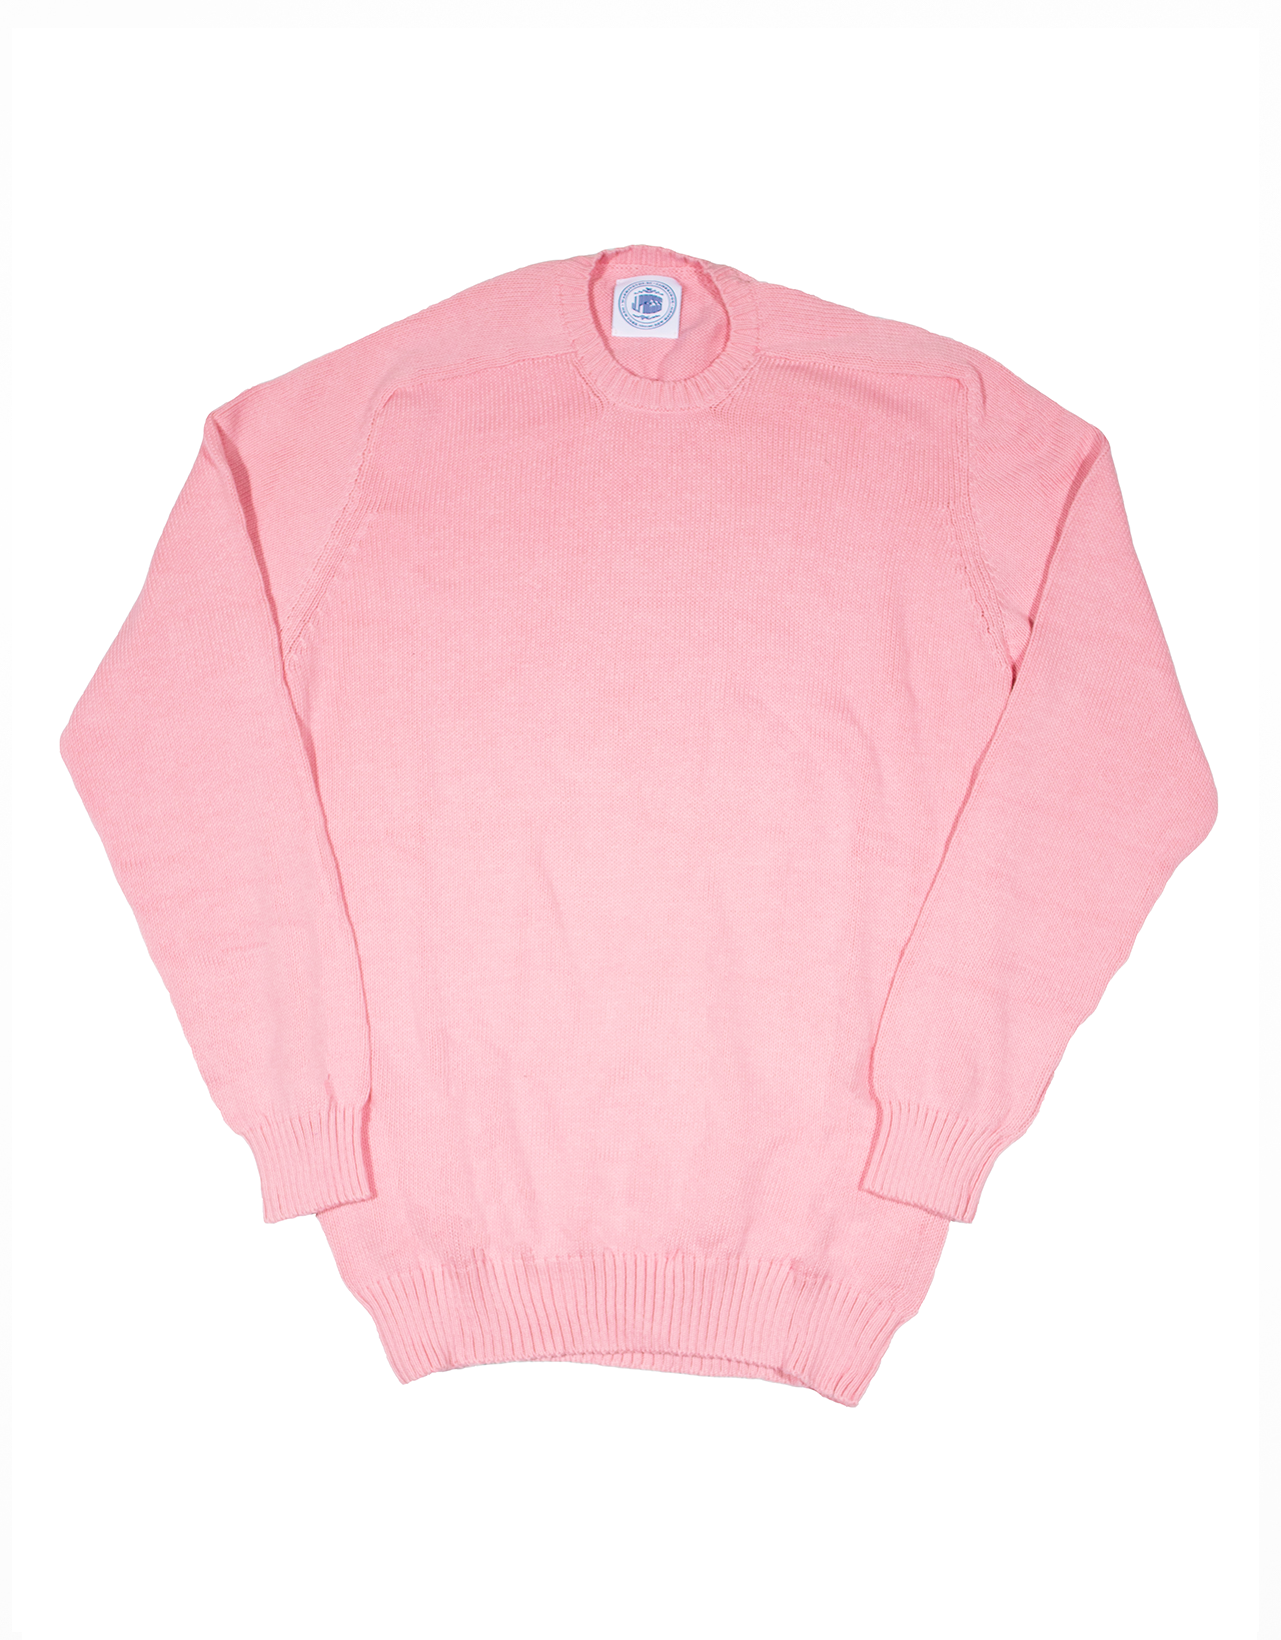 COTTON SWEATER - PINK